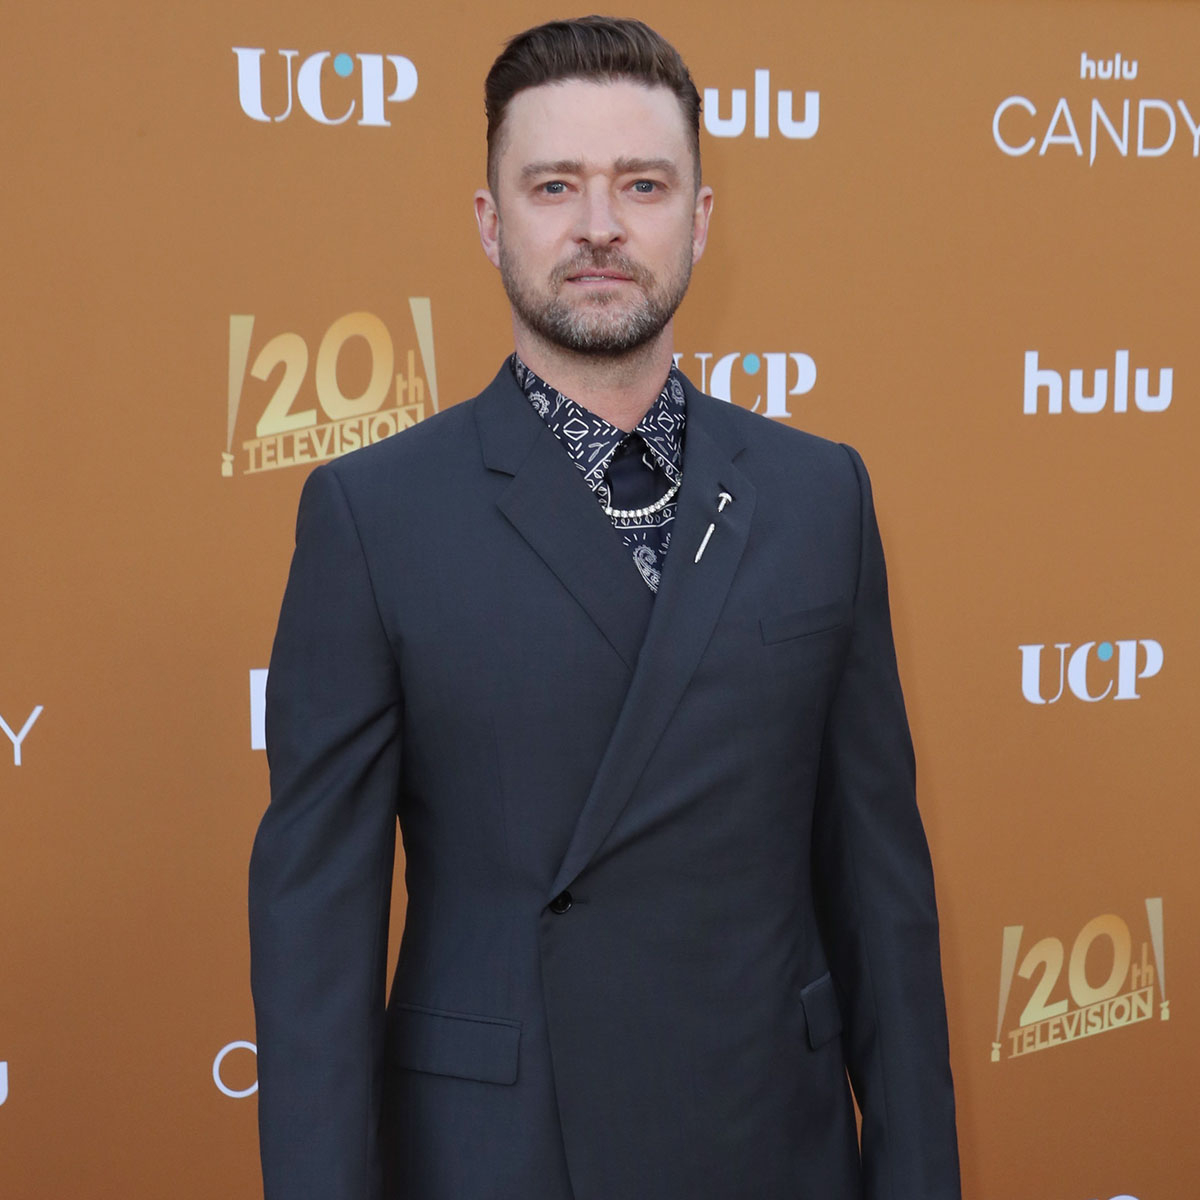 Justin Timberlake Shares Rare Photo of His 2 Sons on Father’s Day